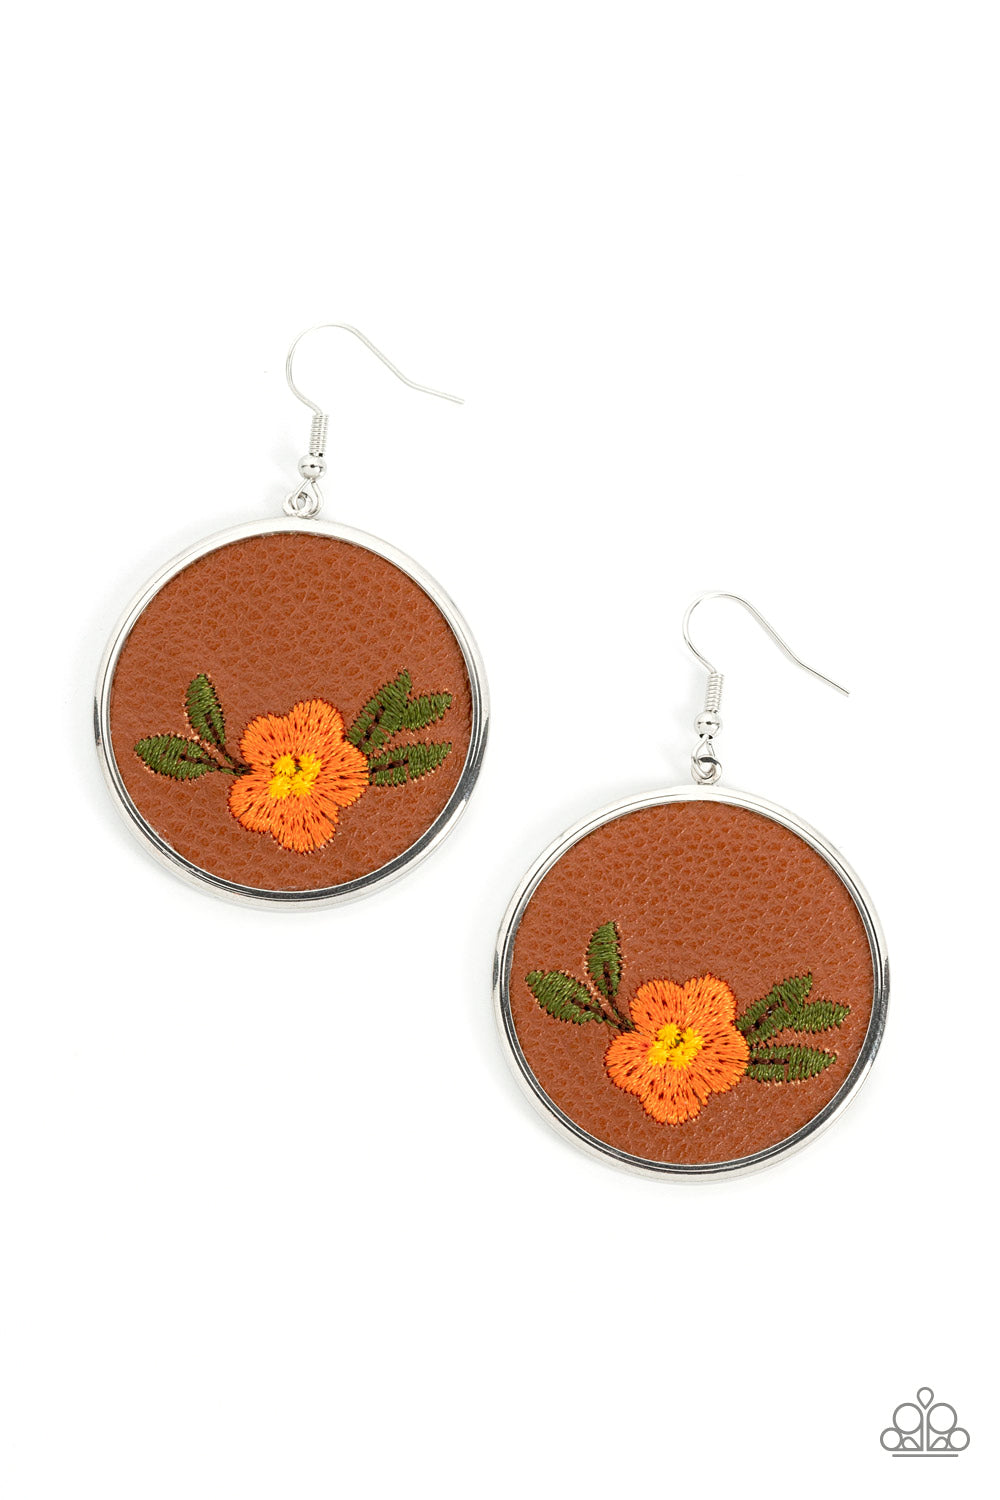 Paparazzi Prairie Patchwork -Orange Leather Earrings leafy orange flower is embroidered along the bottom of a piece of leather that is encased in a sleek silver frame, blooming into a homespun fashion. Earring attaches to a standard fishhook fitting.  Sold as one pair of earrings.